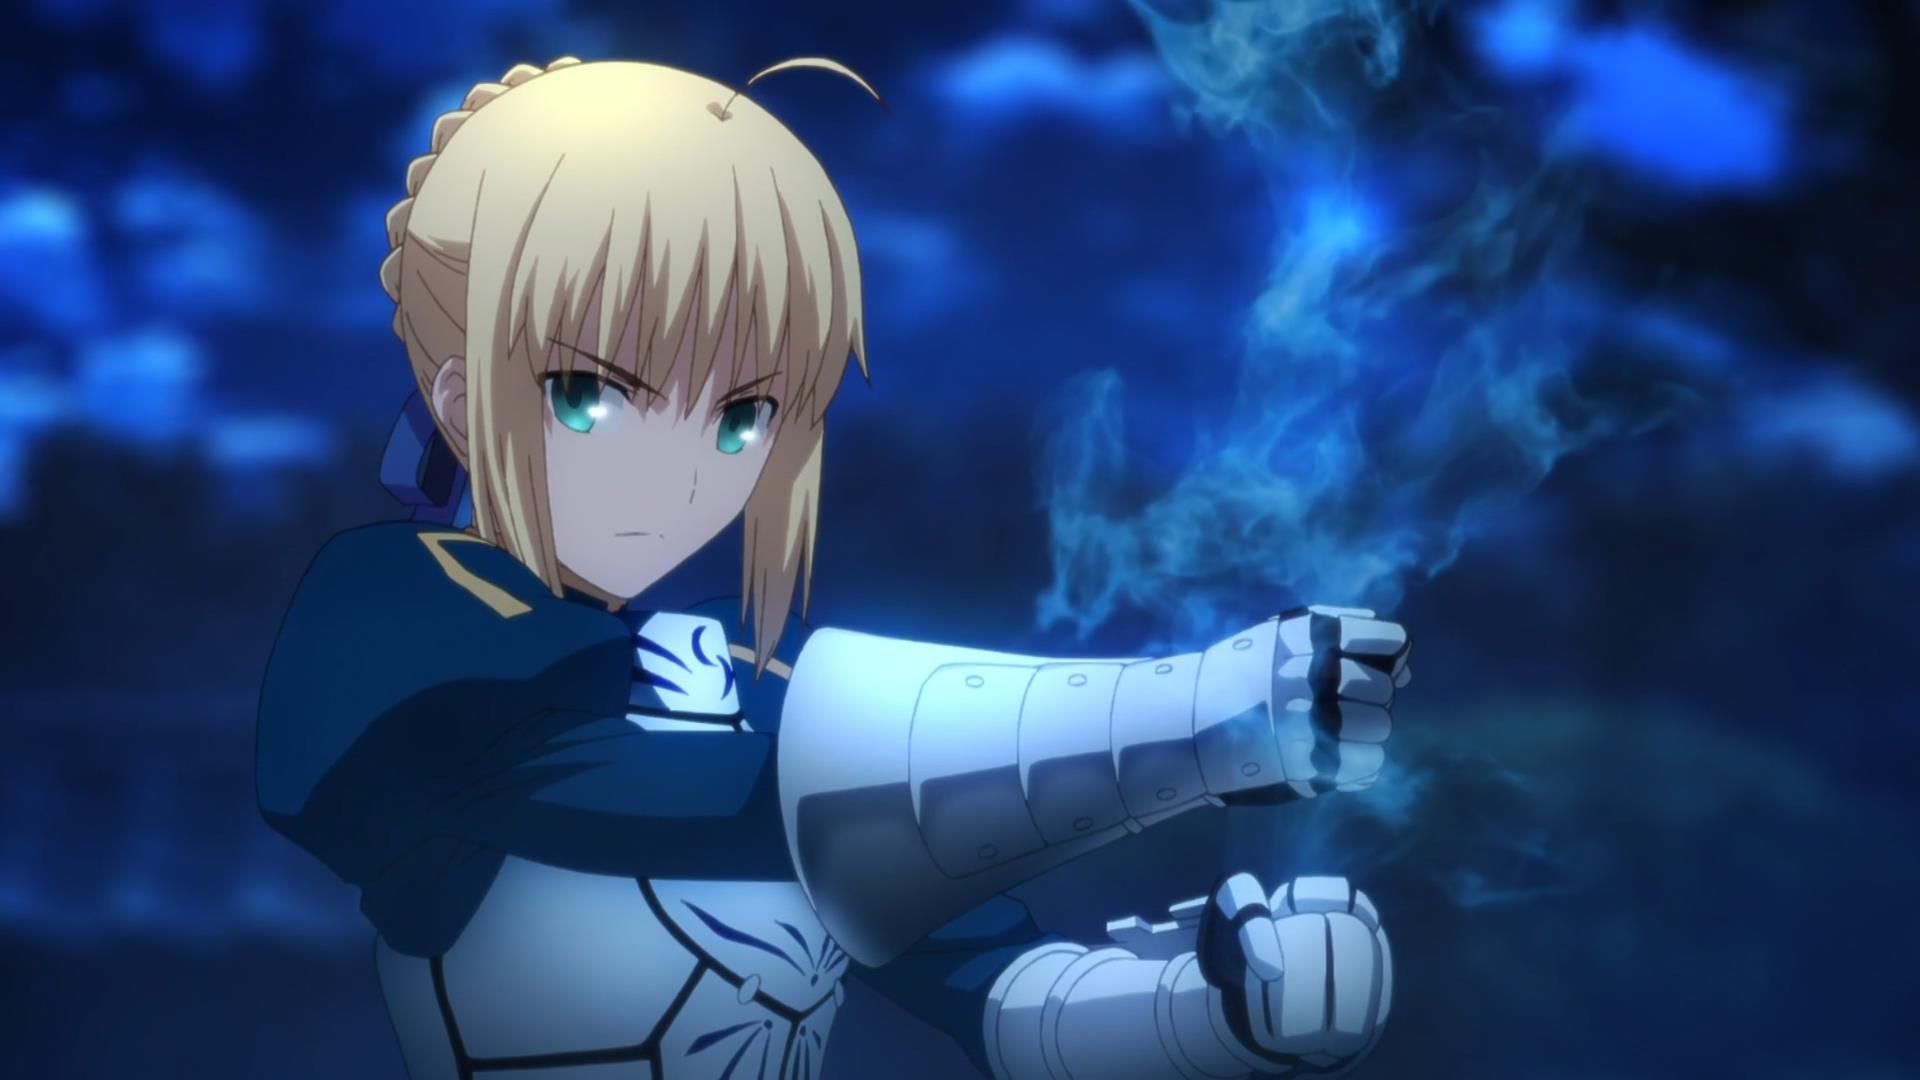 Fate/stay night [Unlimited Blade Works] background